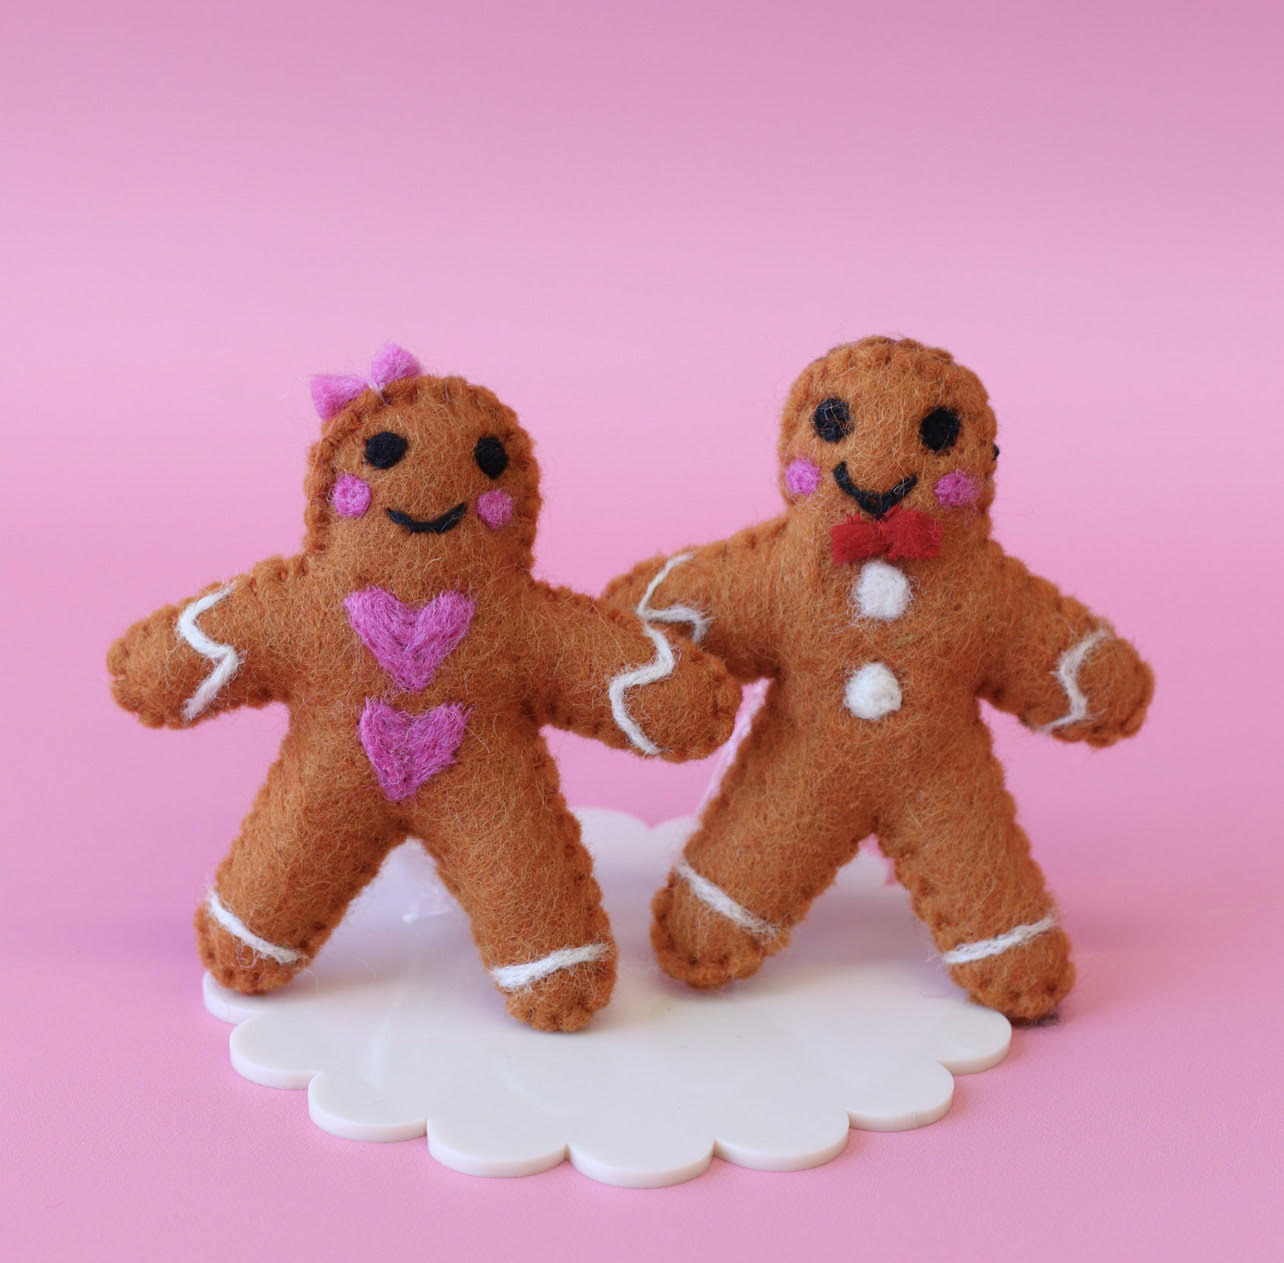 Ginger the Gingerbread kid - pink